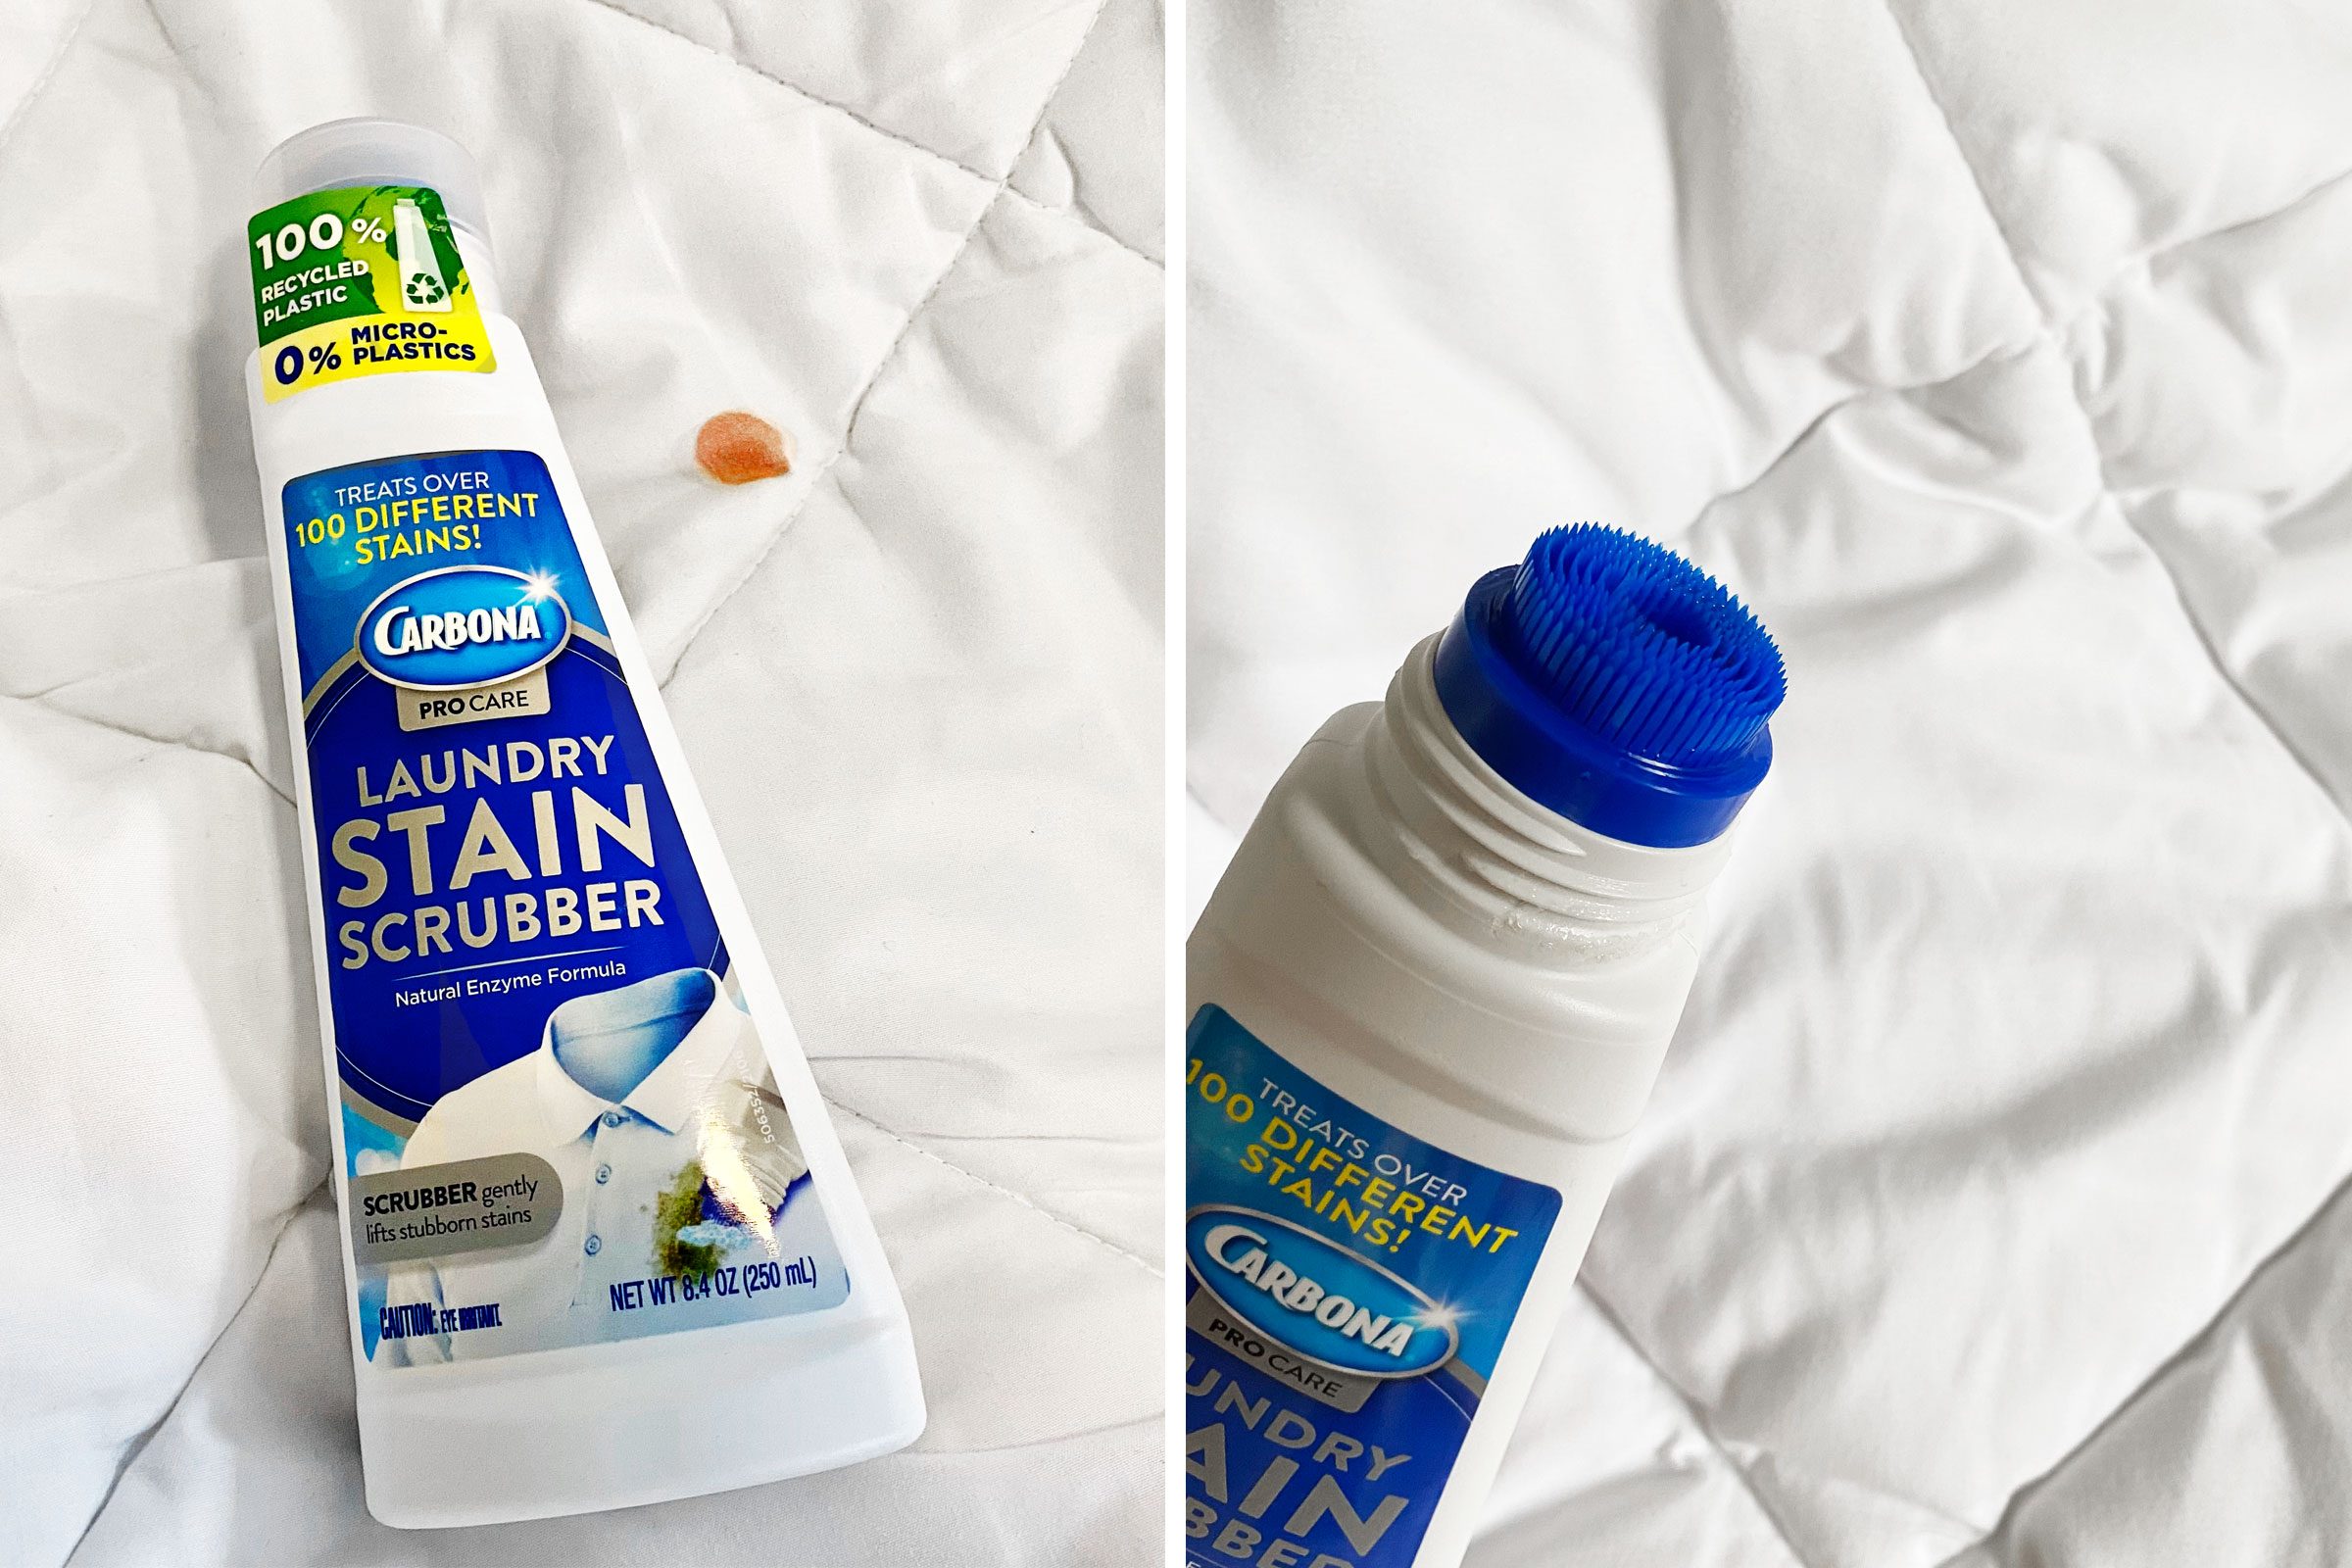 Carbona Laundry Stain Scrubber Review: The Best Stain Remover?